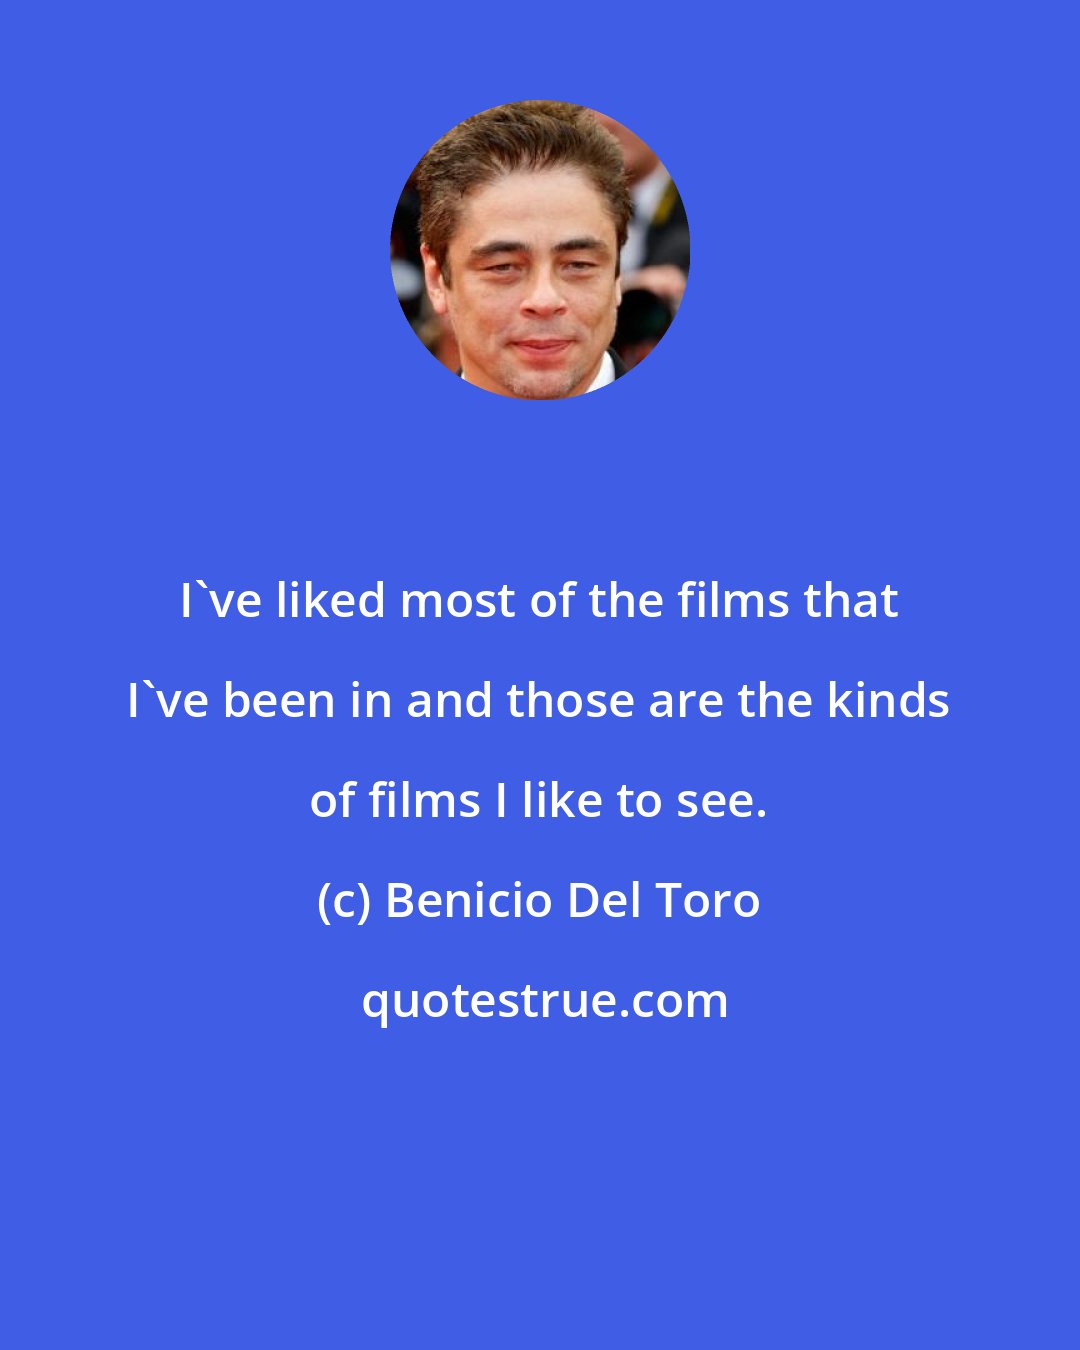 Benicio Del Toro: I've liked most of the films that I've been in and those are the kinds of films I like to see.